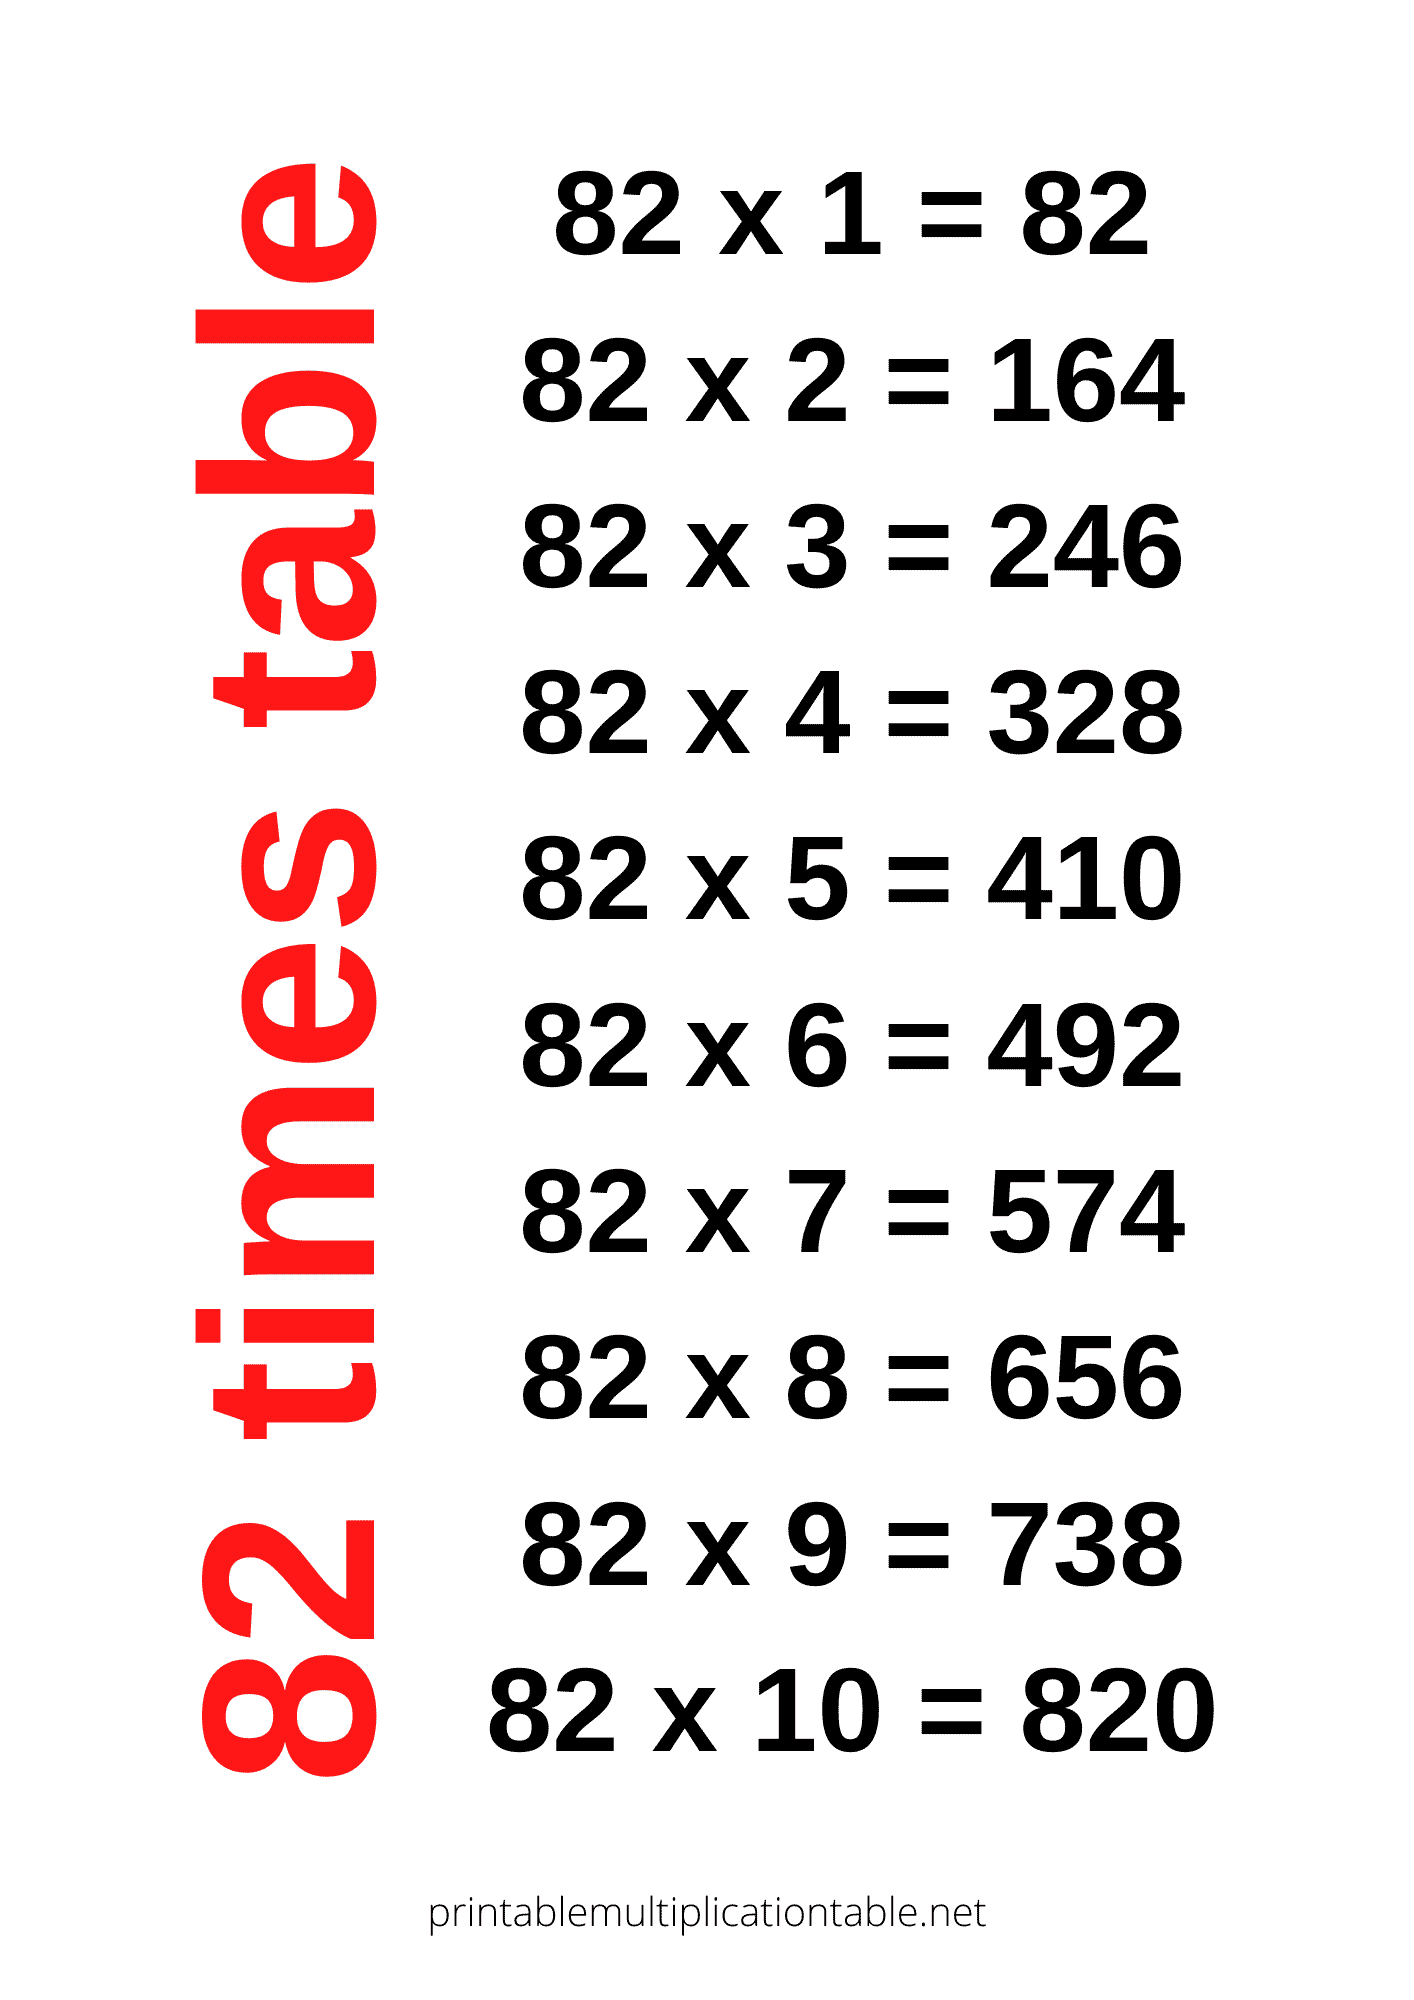 82 times table chart